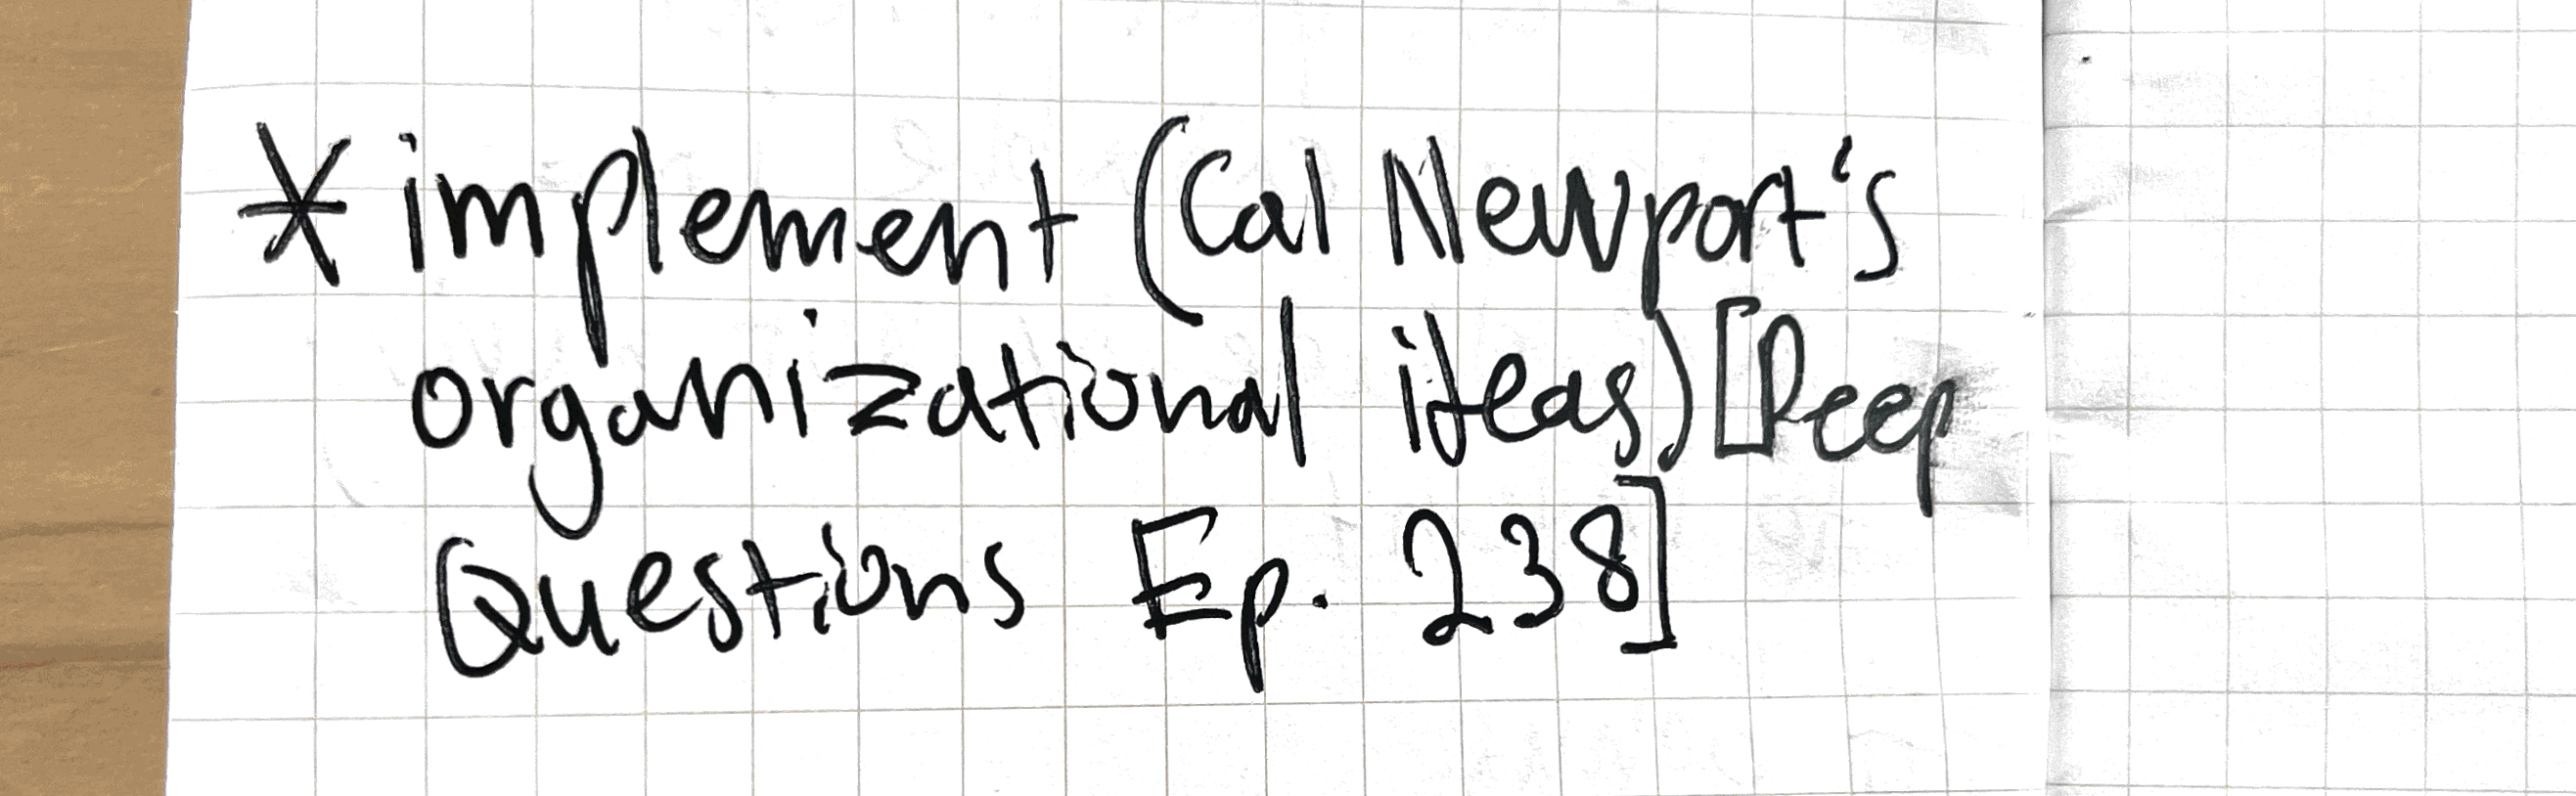 Close-up photo of a handwritten note on grid paper with the text ‘Implement Cal Newport’s organizational ideas)Deep Questions Ep. 238).